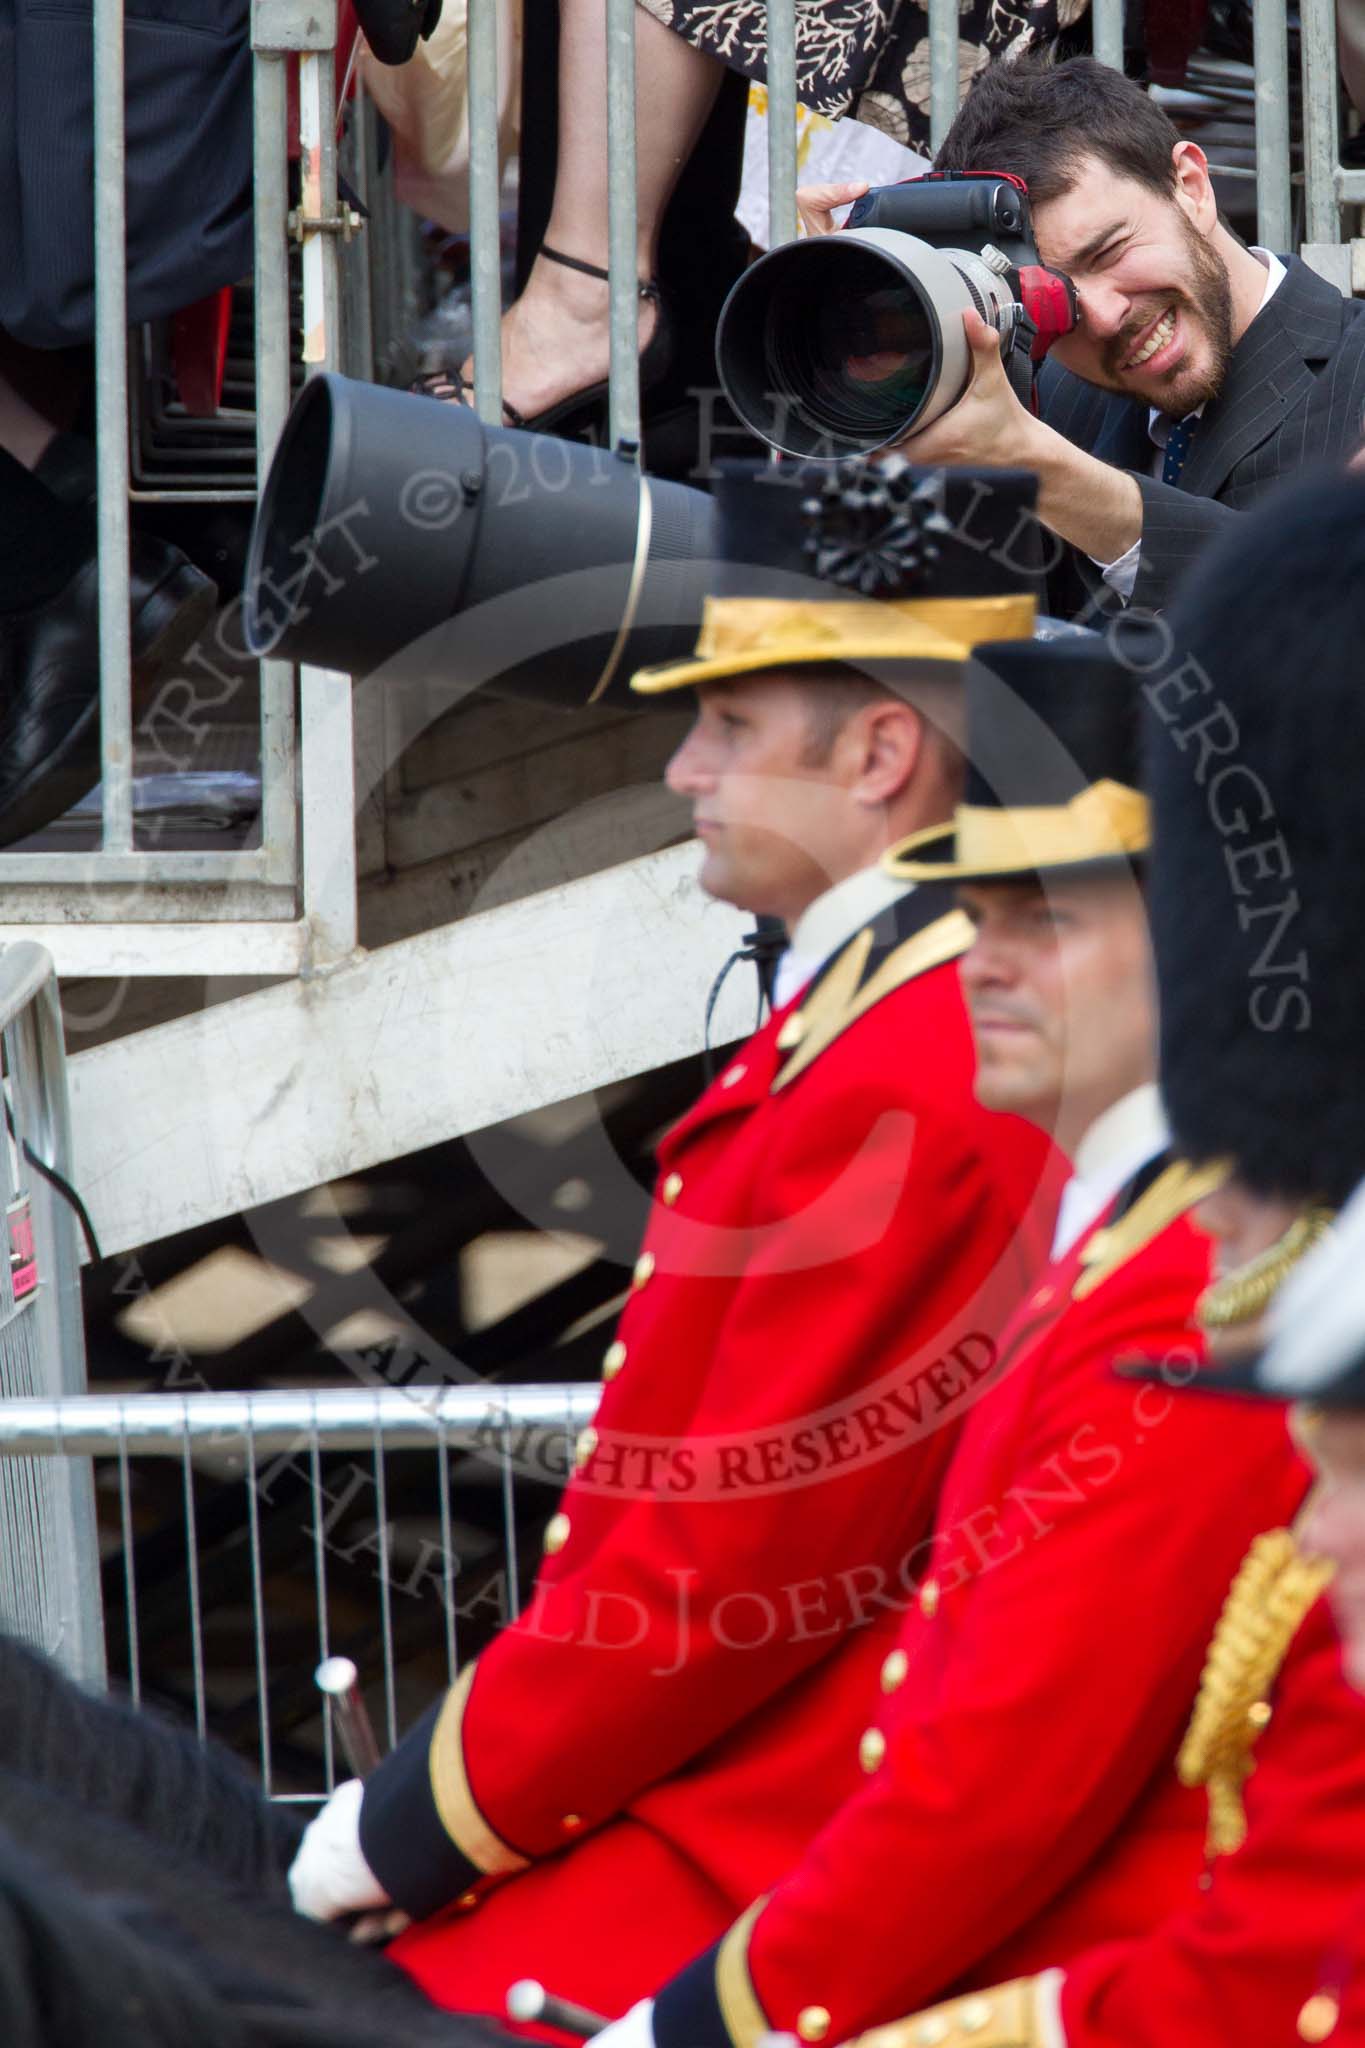 The Colonel's Review 2011: The two Grooms from The Royal Household that are part of the Royal Procession, with a photographer's stand and a grand stand behind..
Horse Guards Parade, Westminster,
London SW1,

United Kingdom,
on 04 June 2011 at 11:09, image #111